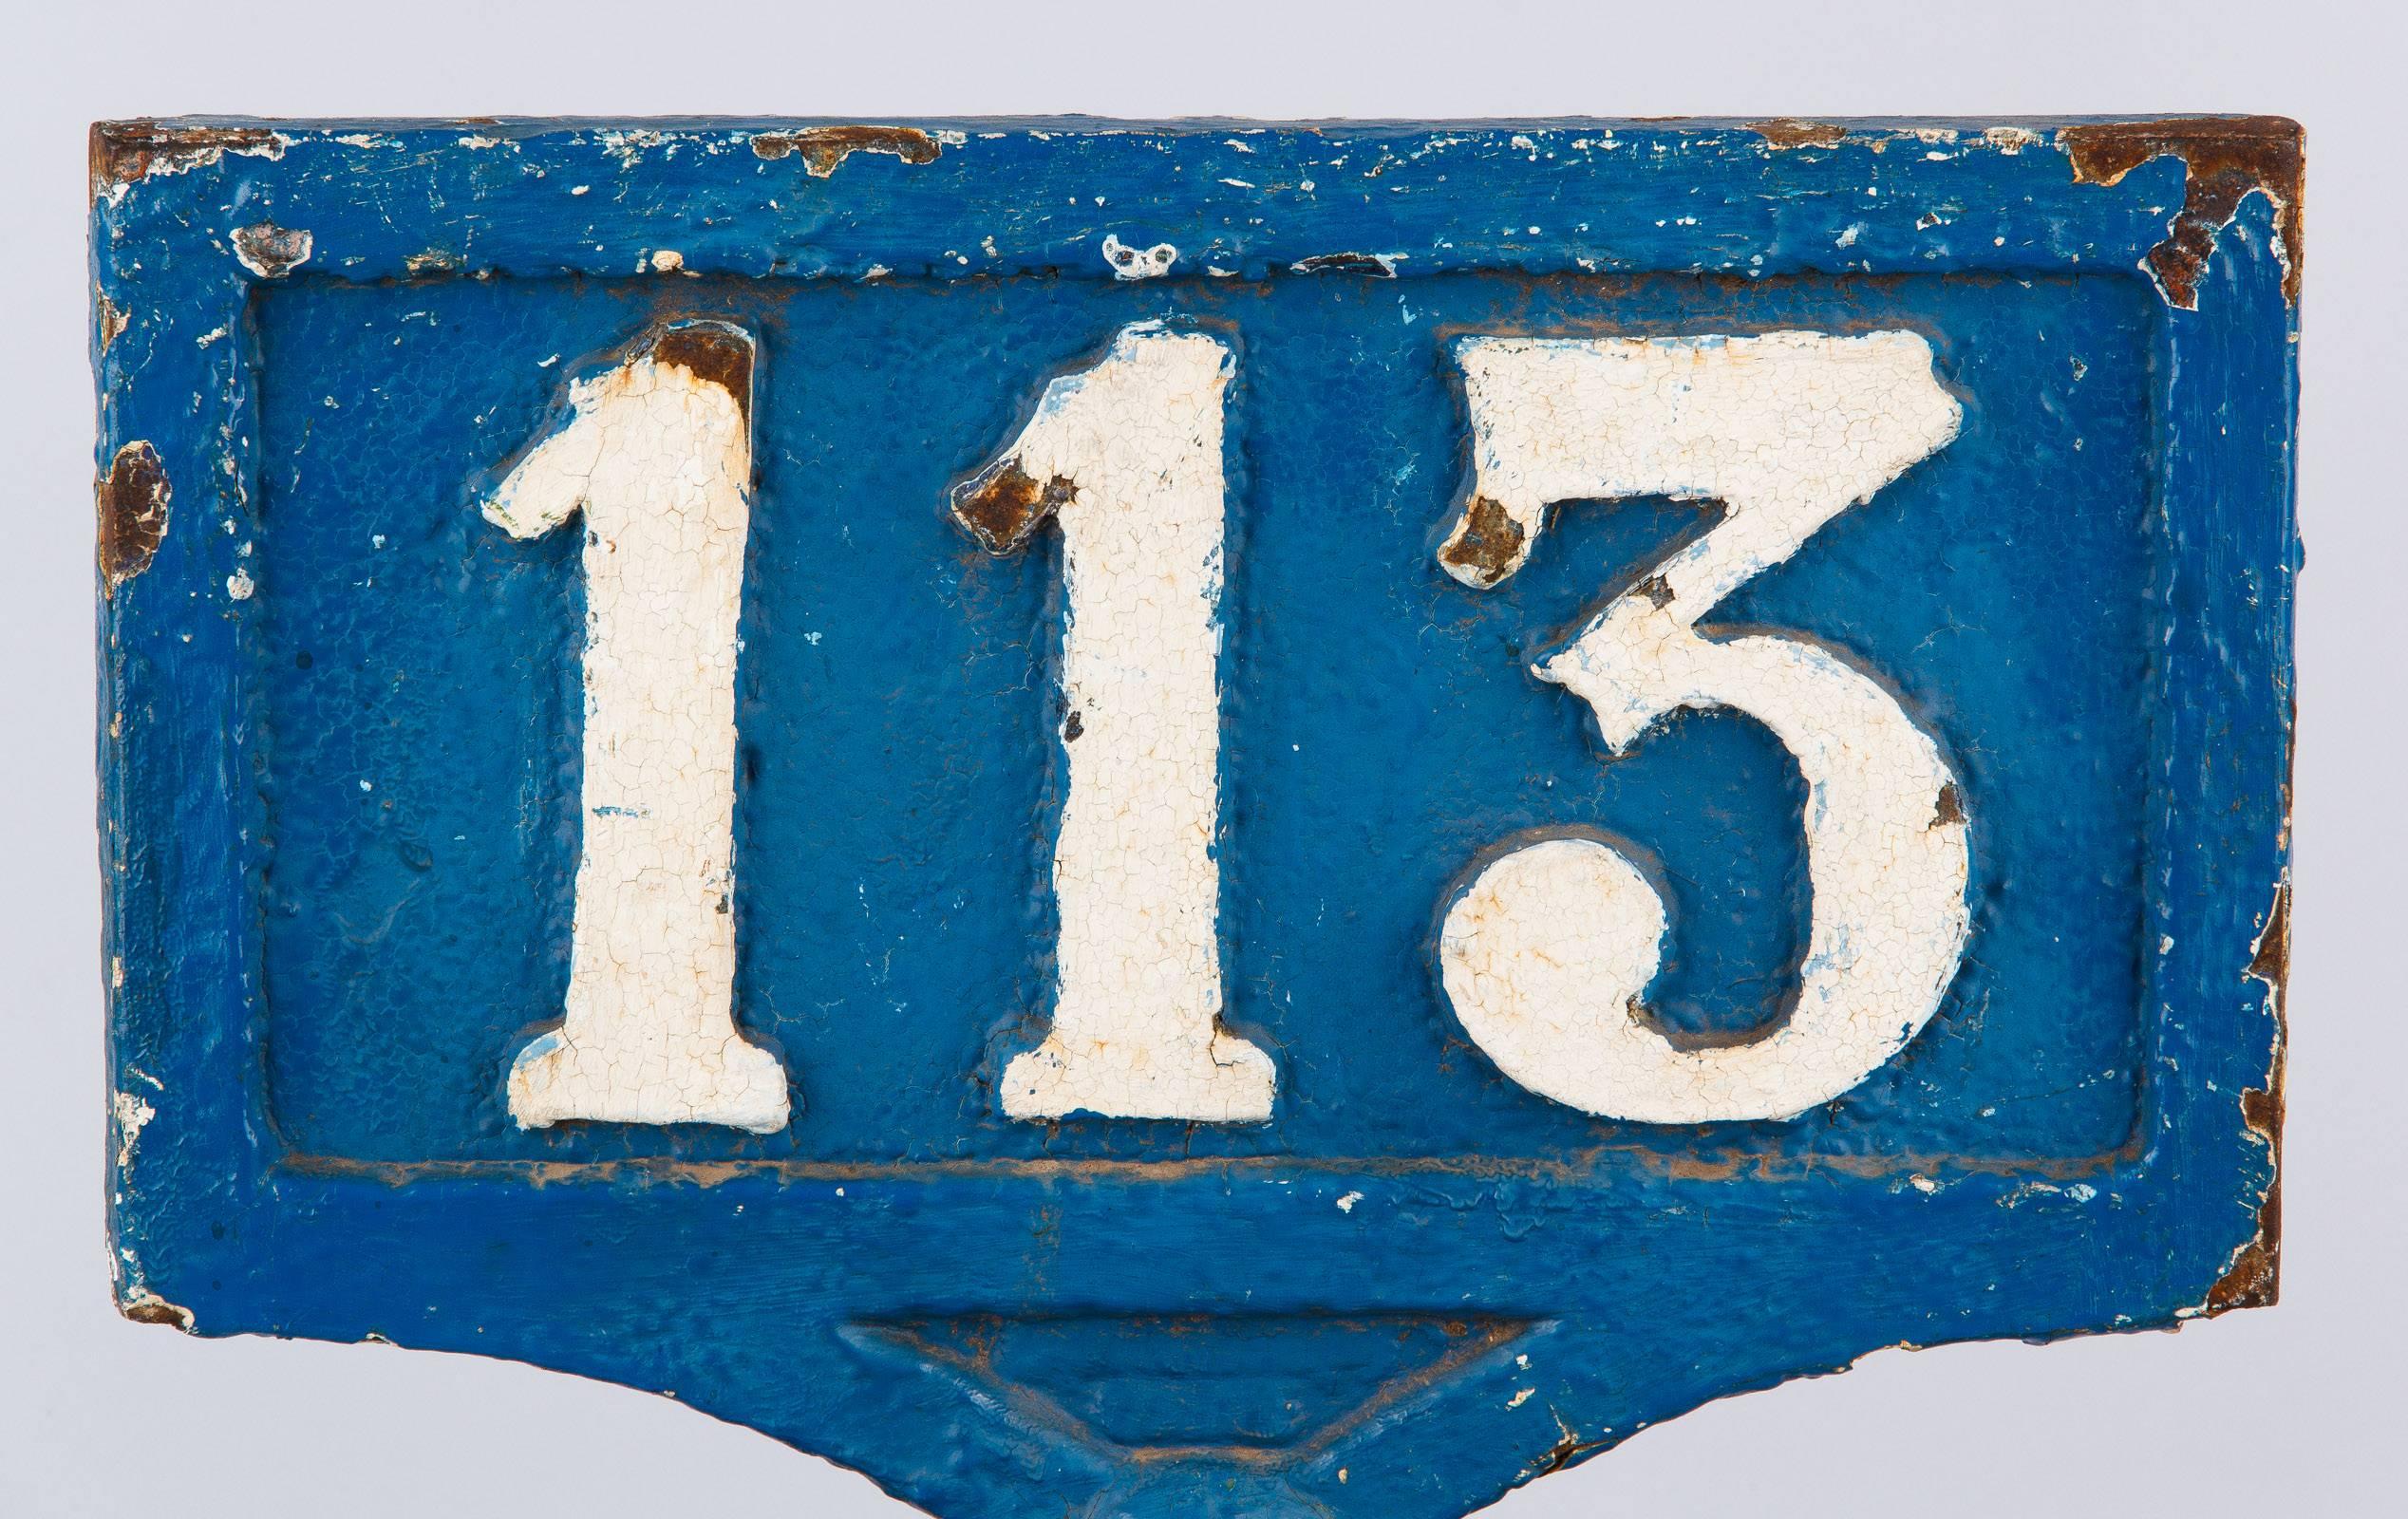 A 19th century French railway sign made of cast iron painted blue and white with the number 113. These signs were placed on top of posts to indicate the railway line number. The octagonal base has a small lip at the bottom and larger molded edge at